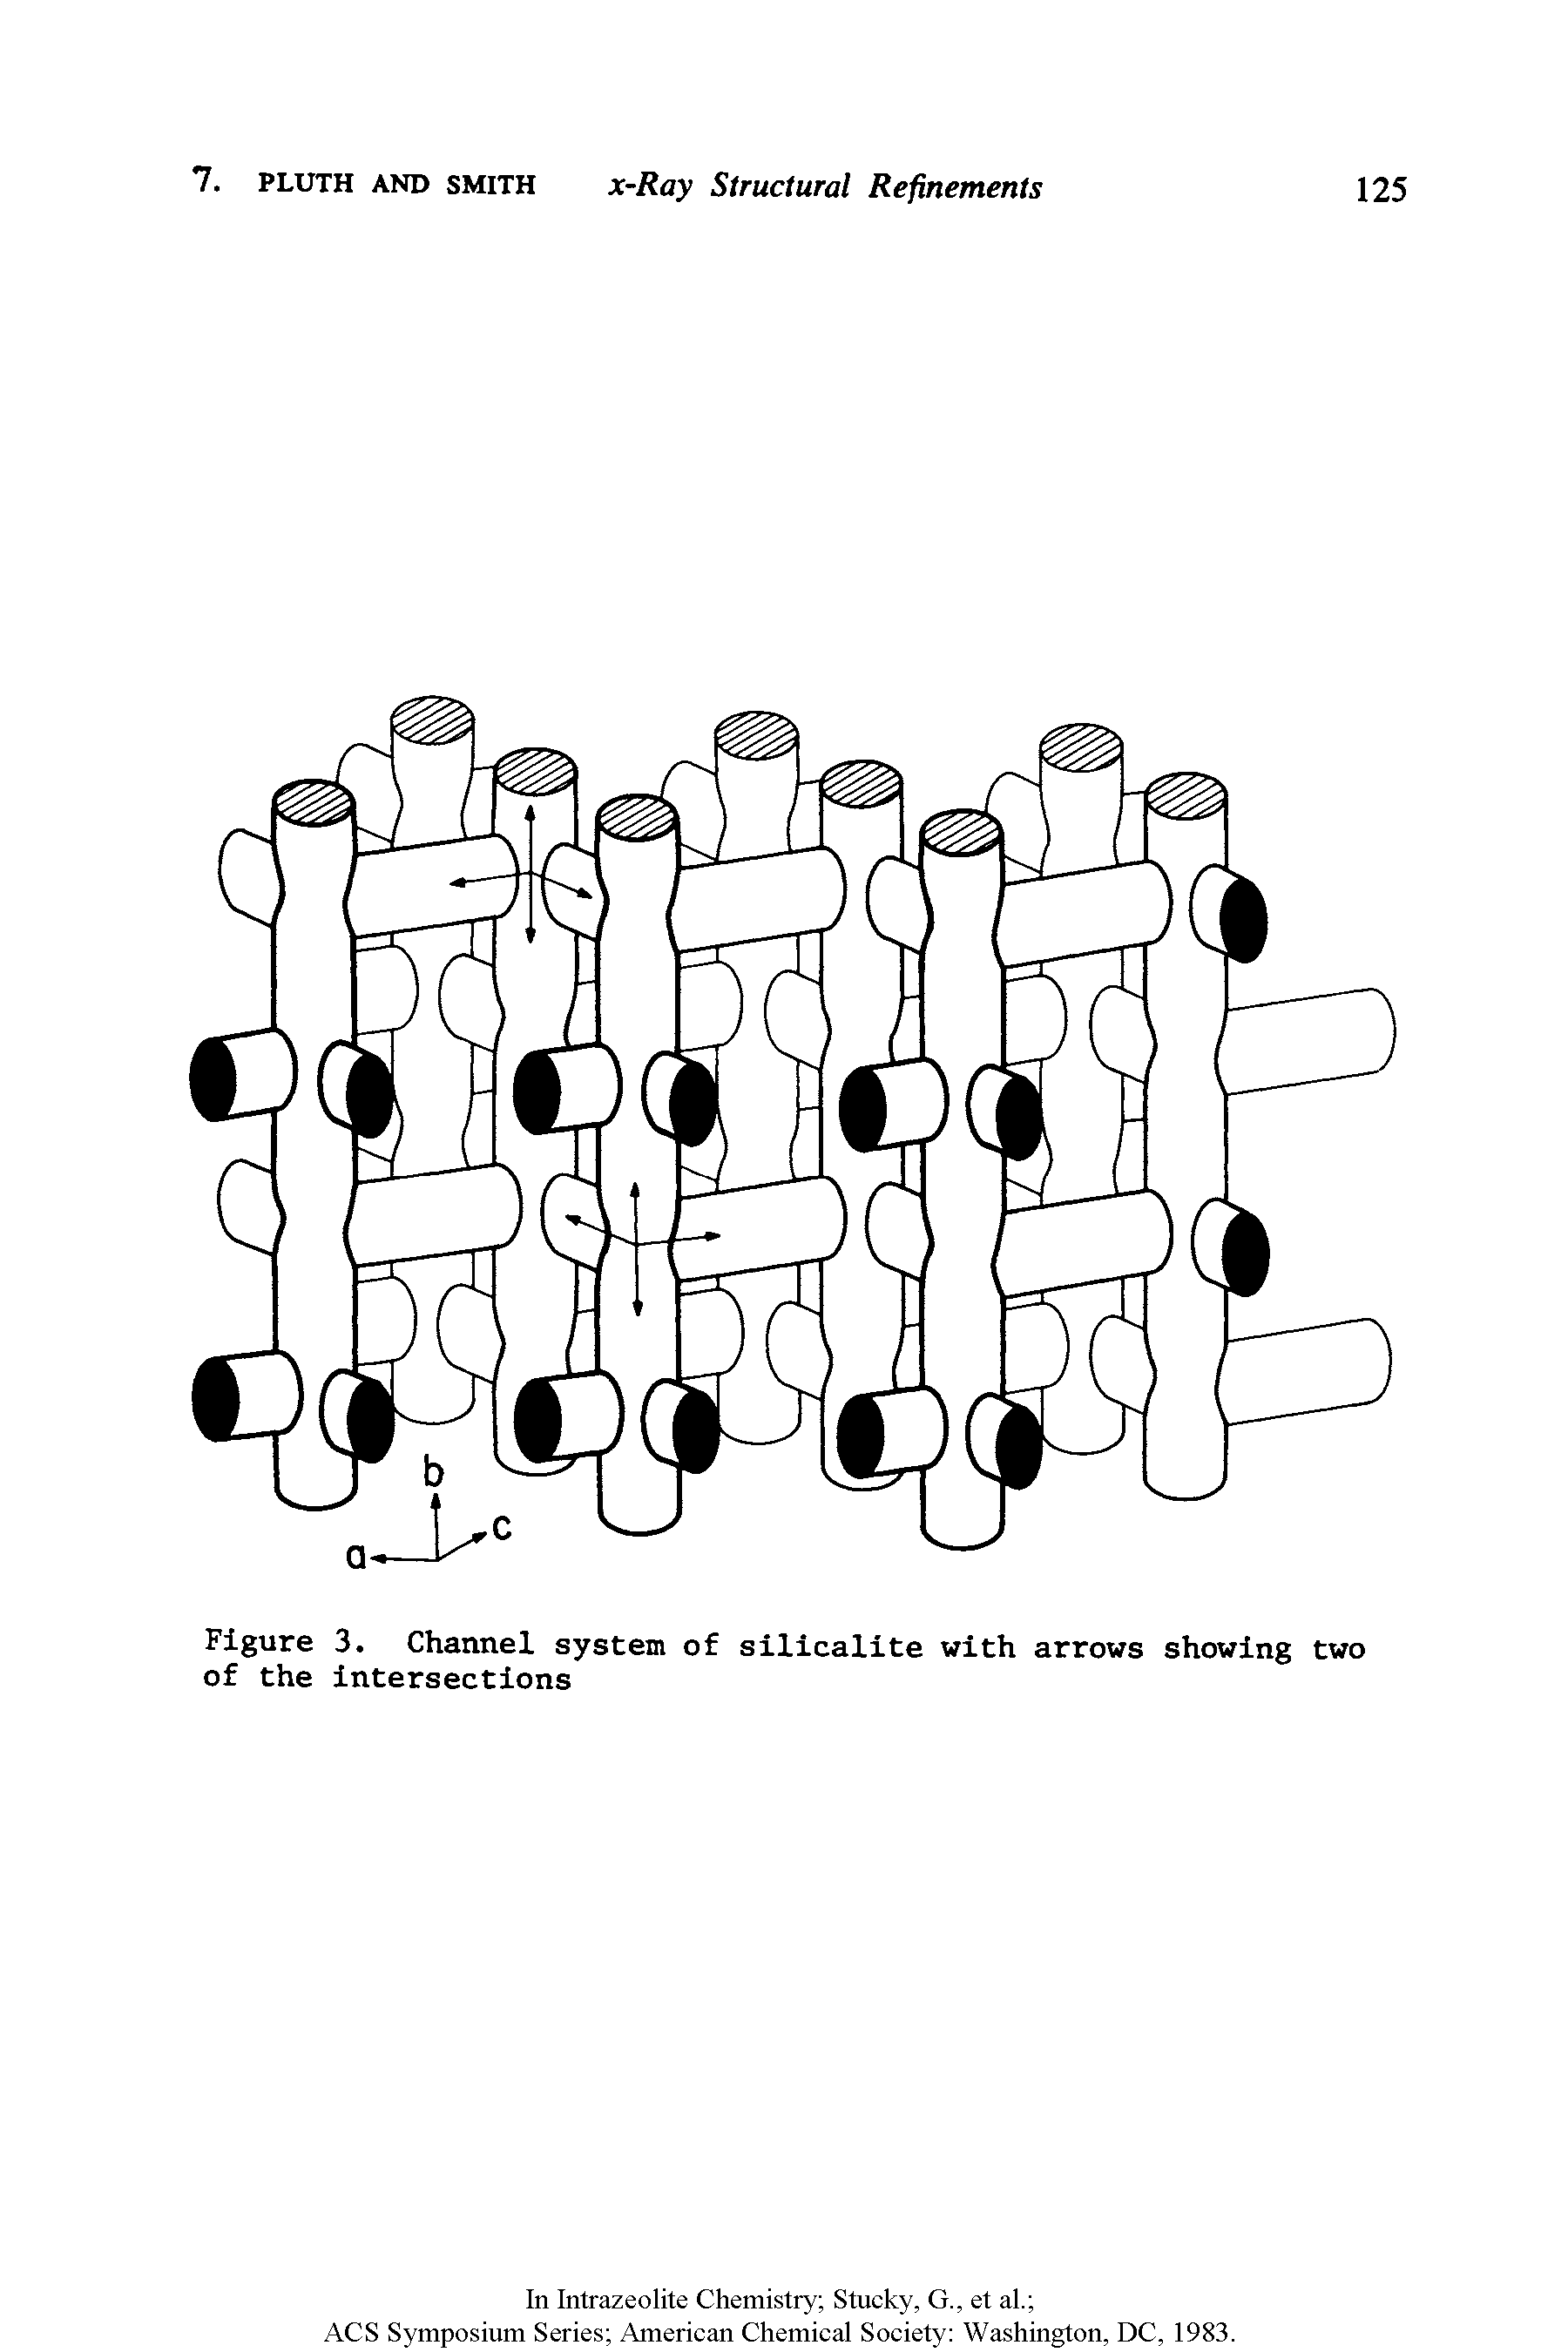 Figure 3. Channel system of silicalite with arrows showing two of the intersections...